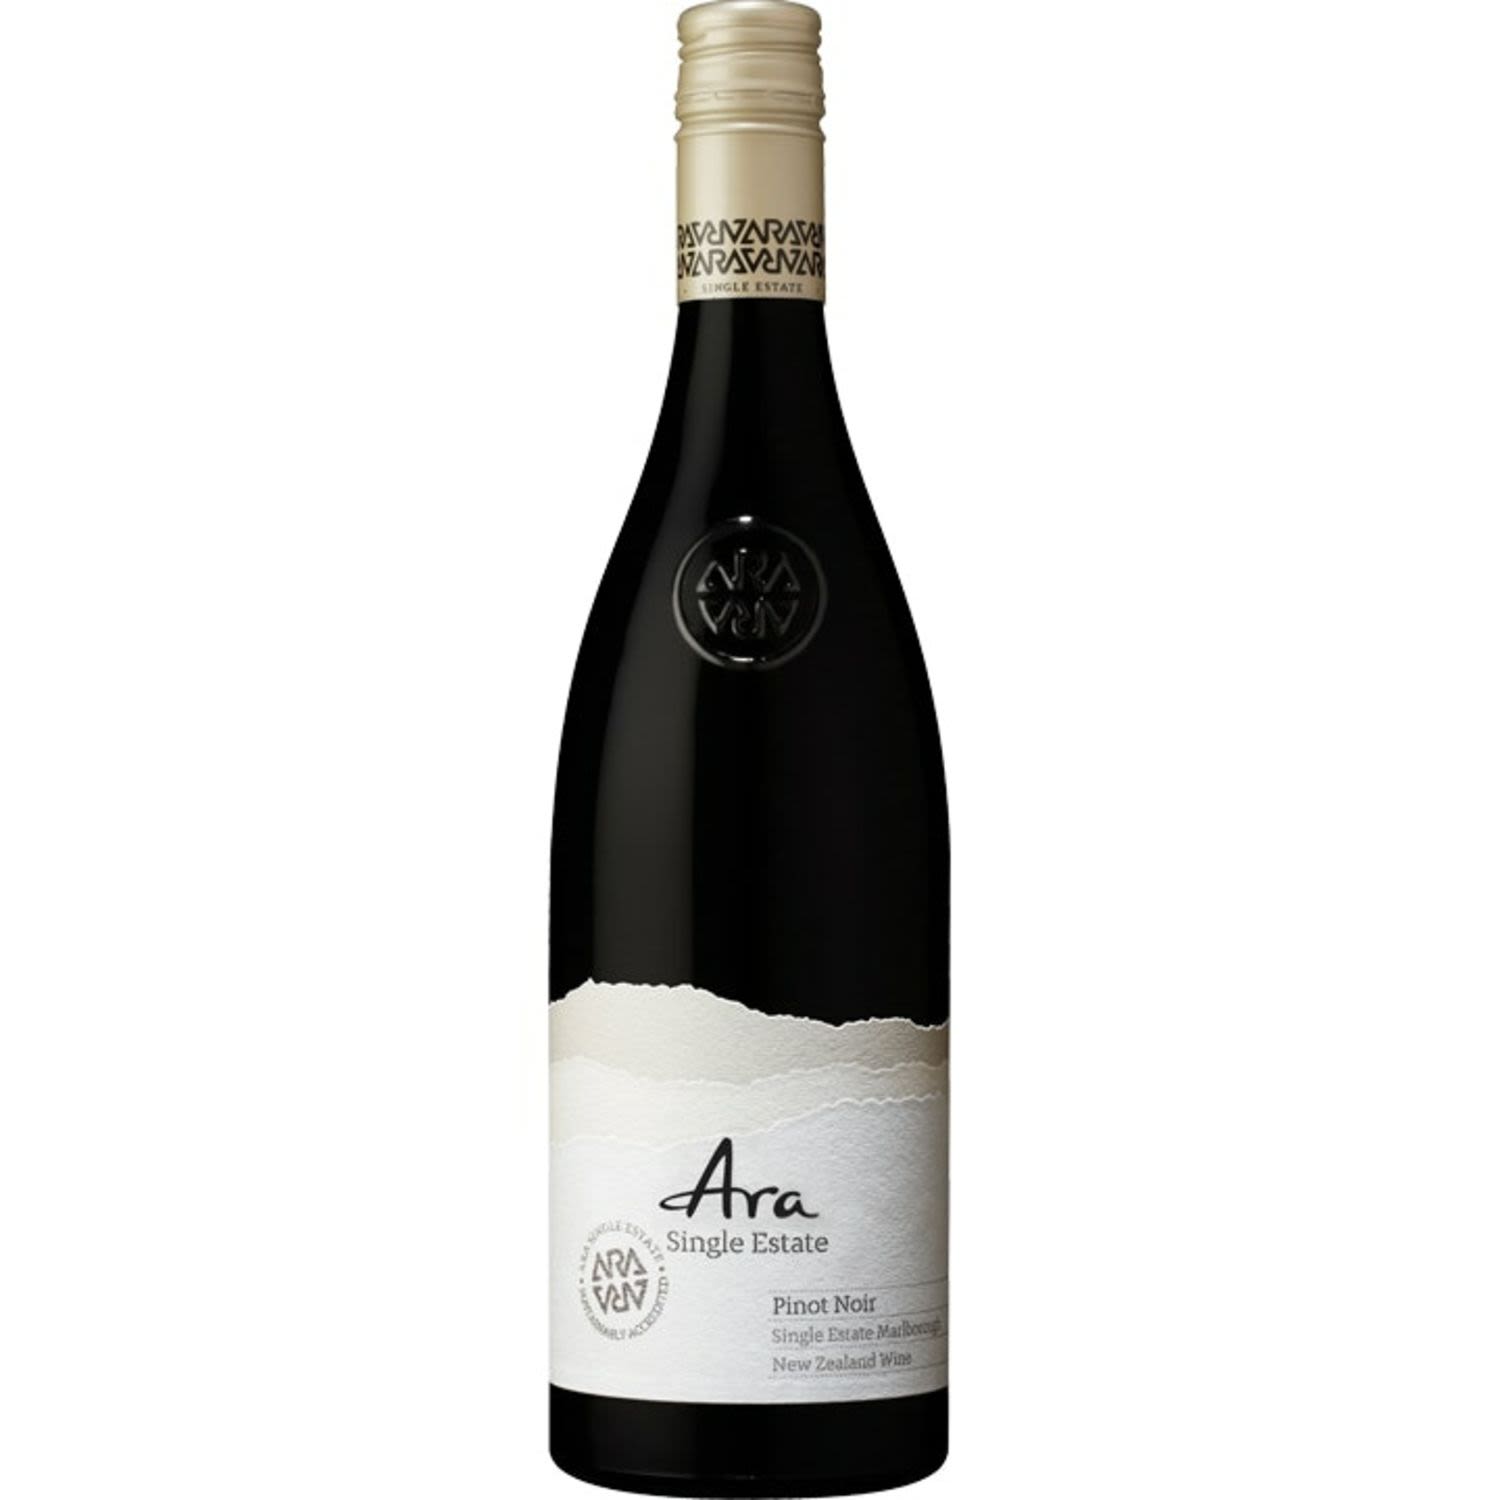 This Single Estate Pinot Noir has been crafted from low-yielding vines from our site in the Southern Valleys of Marlborough.Vintage 2016 was unusually warm However, true to their mantra of embracing Marlborough’s conditions the viticultural and winemaking teams managed the vineyard by selectively reducing fruit so vines were able to ensure the remaining fruit ripened with full flavour.Fruit was hand harvested in four separate lots, picked at optimum ripeness.<br /> <br />Alcohol Volume: 13.50%<br /><br />Pack Format: Bottle<br /><br />Standard Drinks: 8.3<br /><br />Pack Type: Bottle<br /><br />Country of Origin: New Zealand<br /><br />Region: Marlborough<br /><br />Vintage: Various<br />